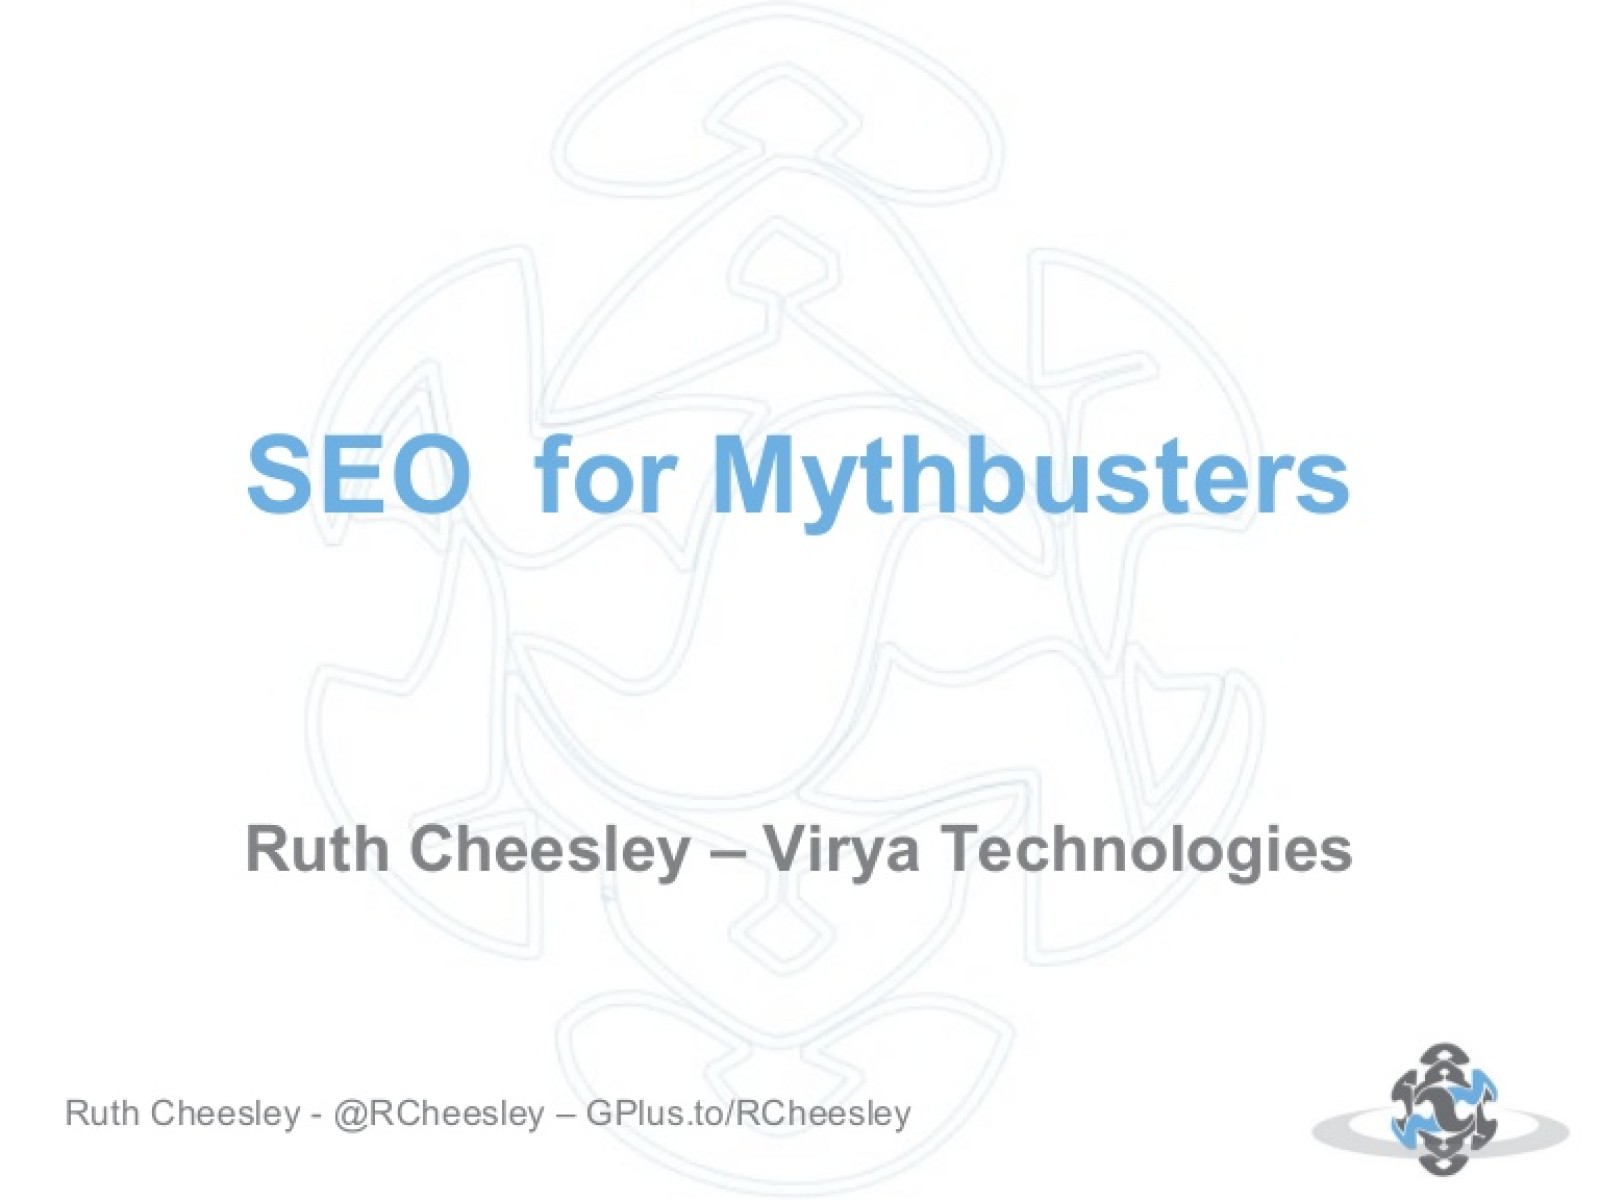 SEO for Mythbusters